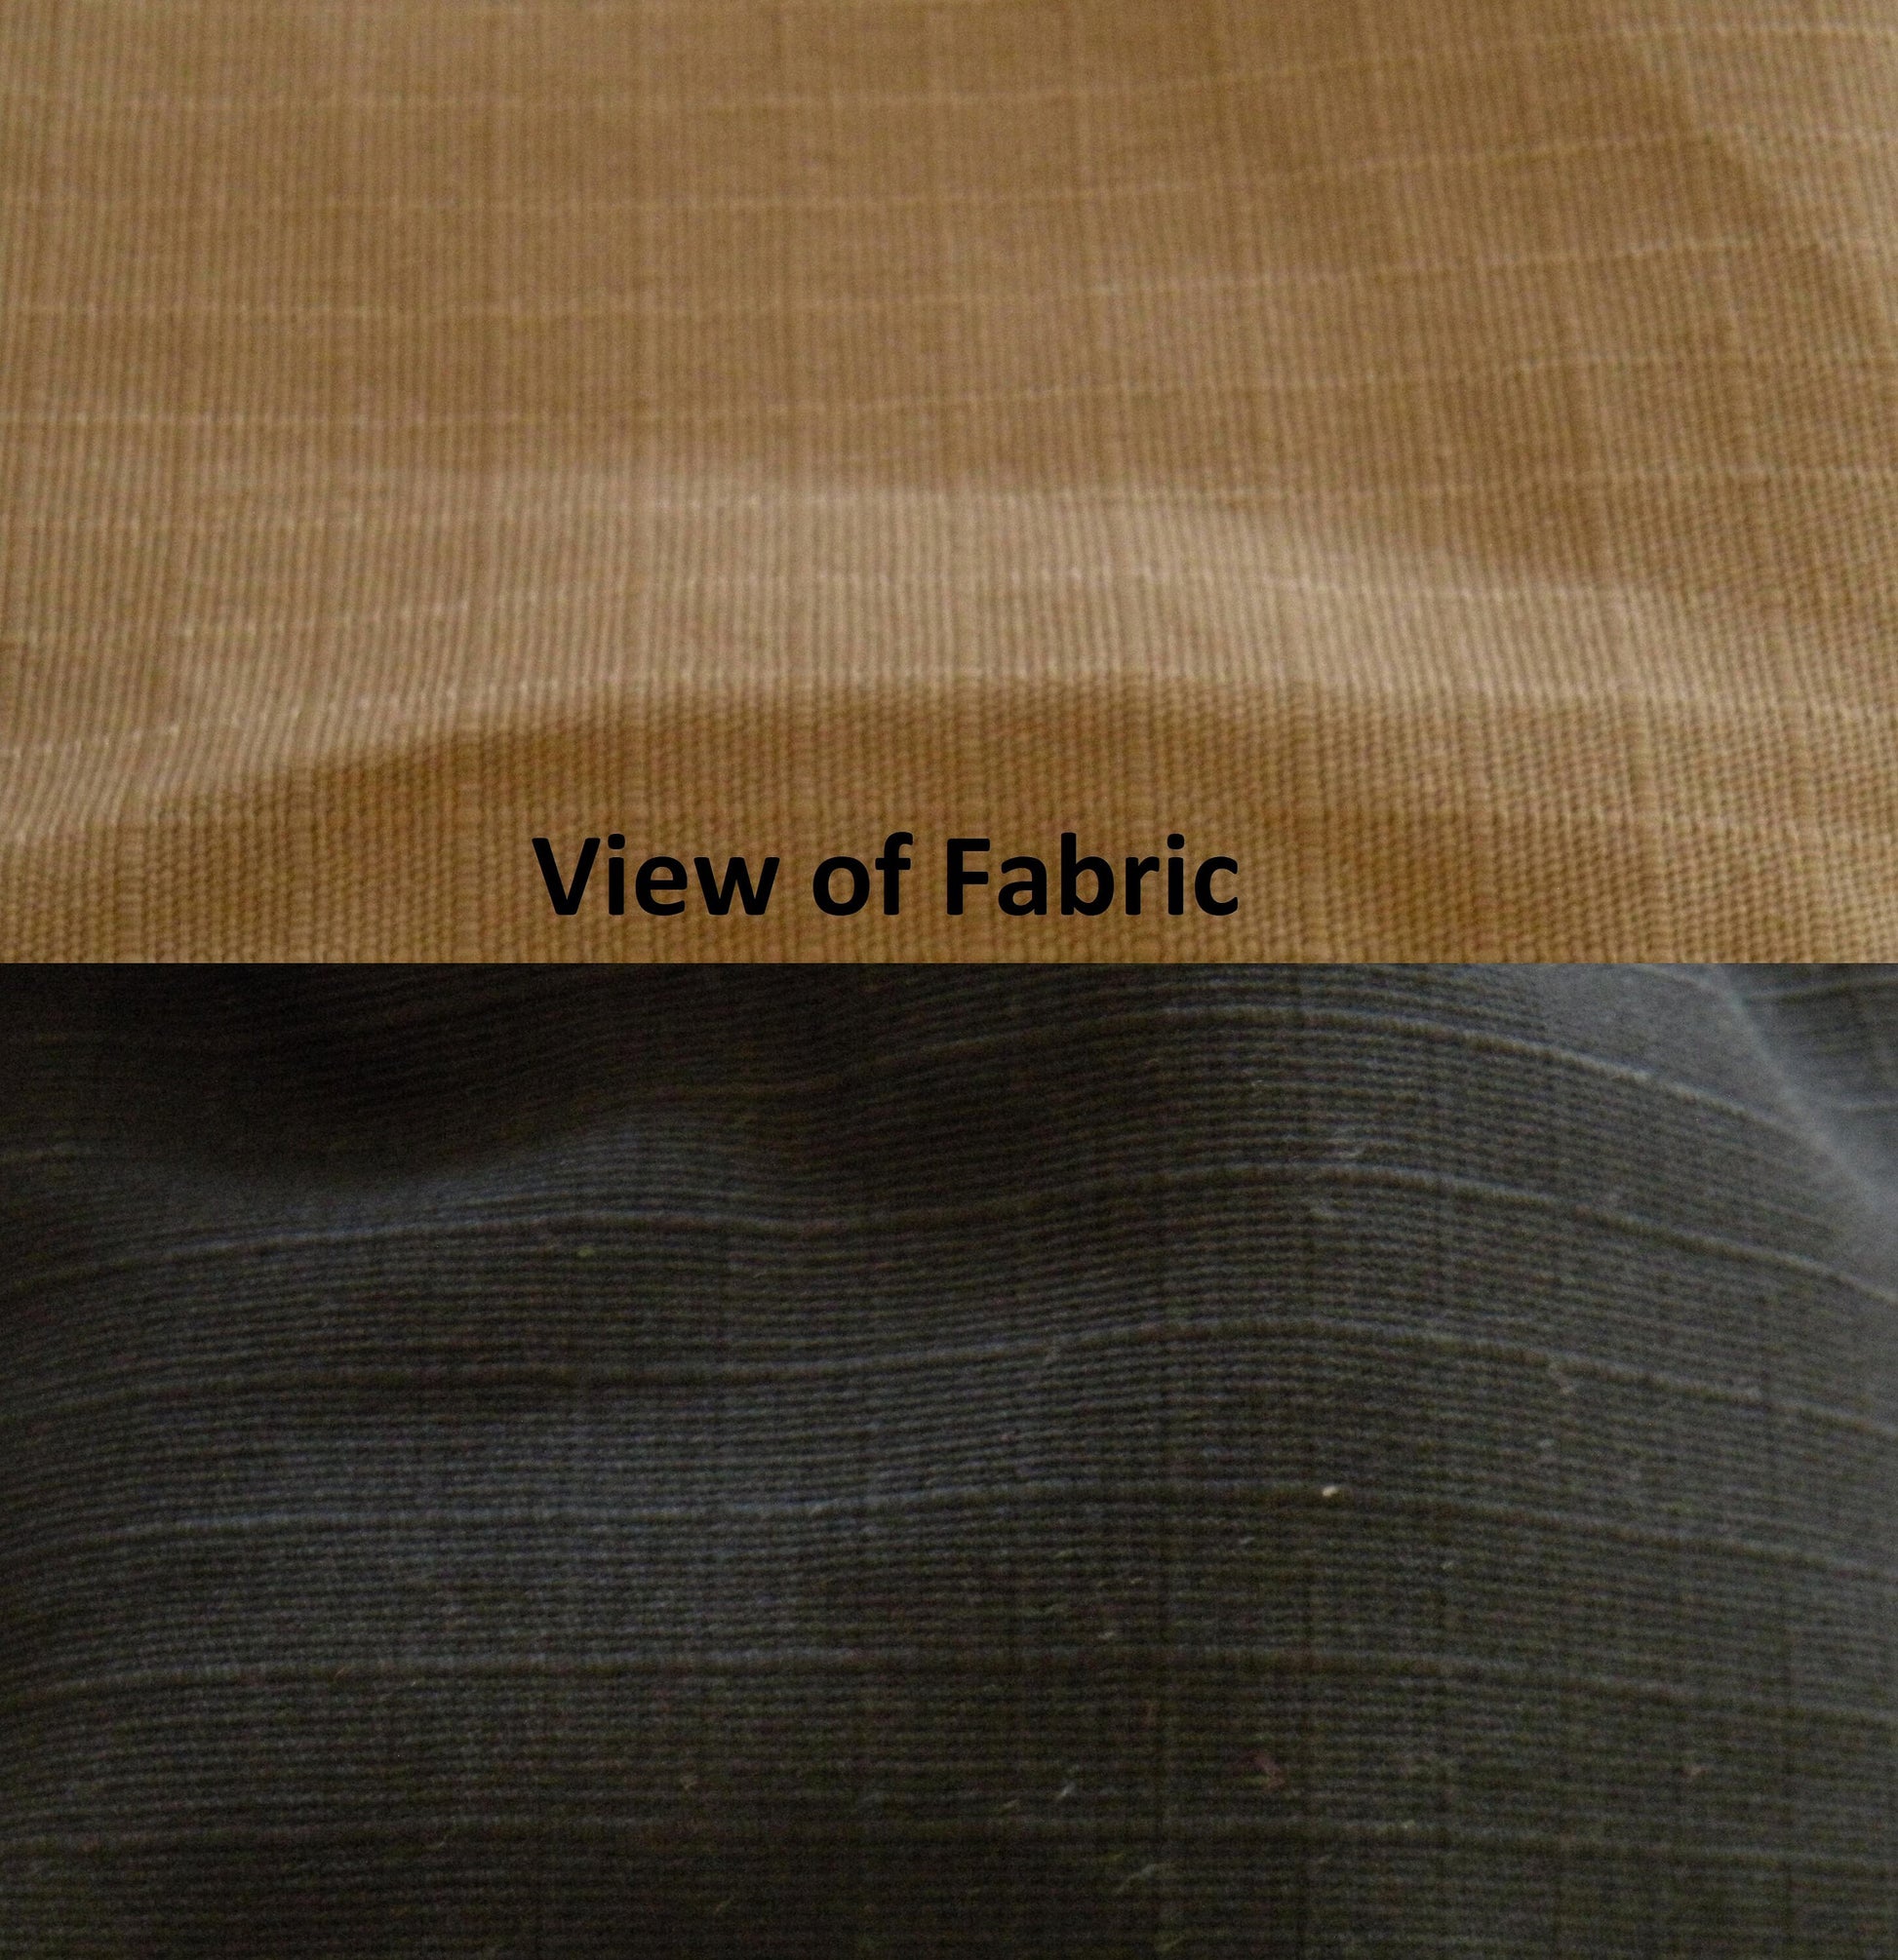 view of the tan and black 100% cotton ripstop material